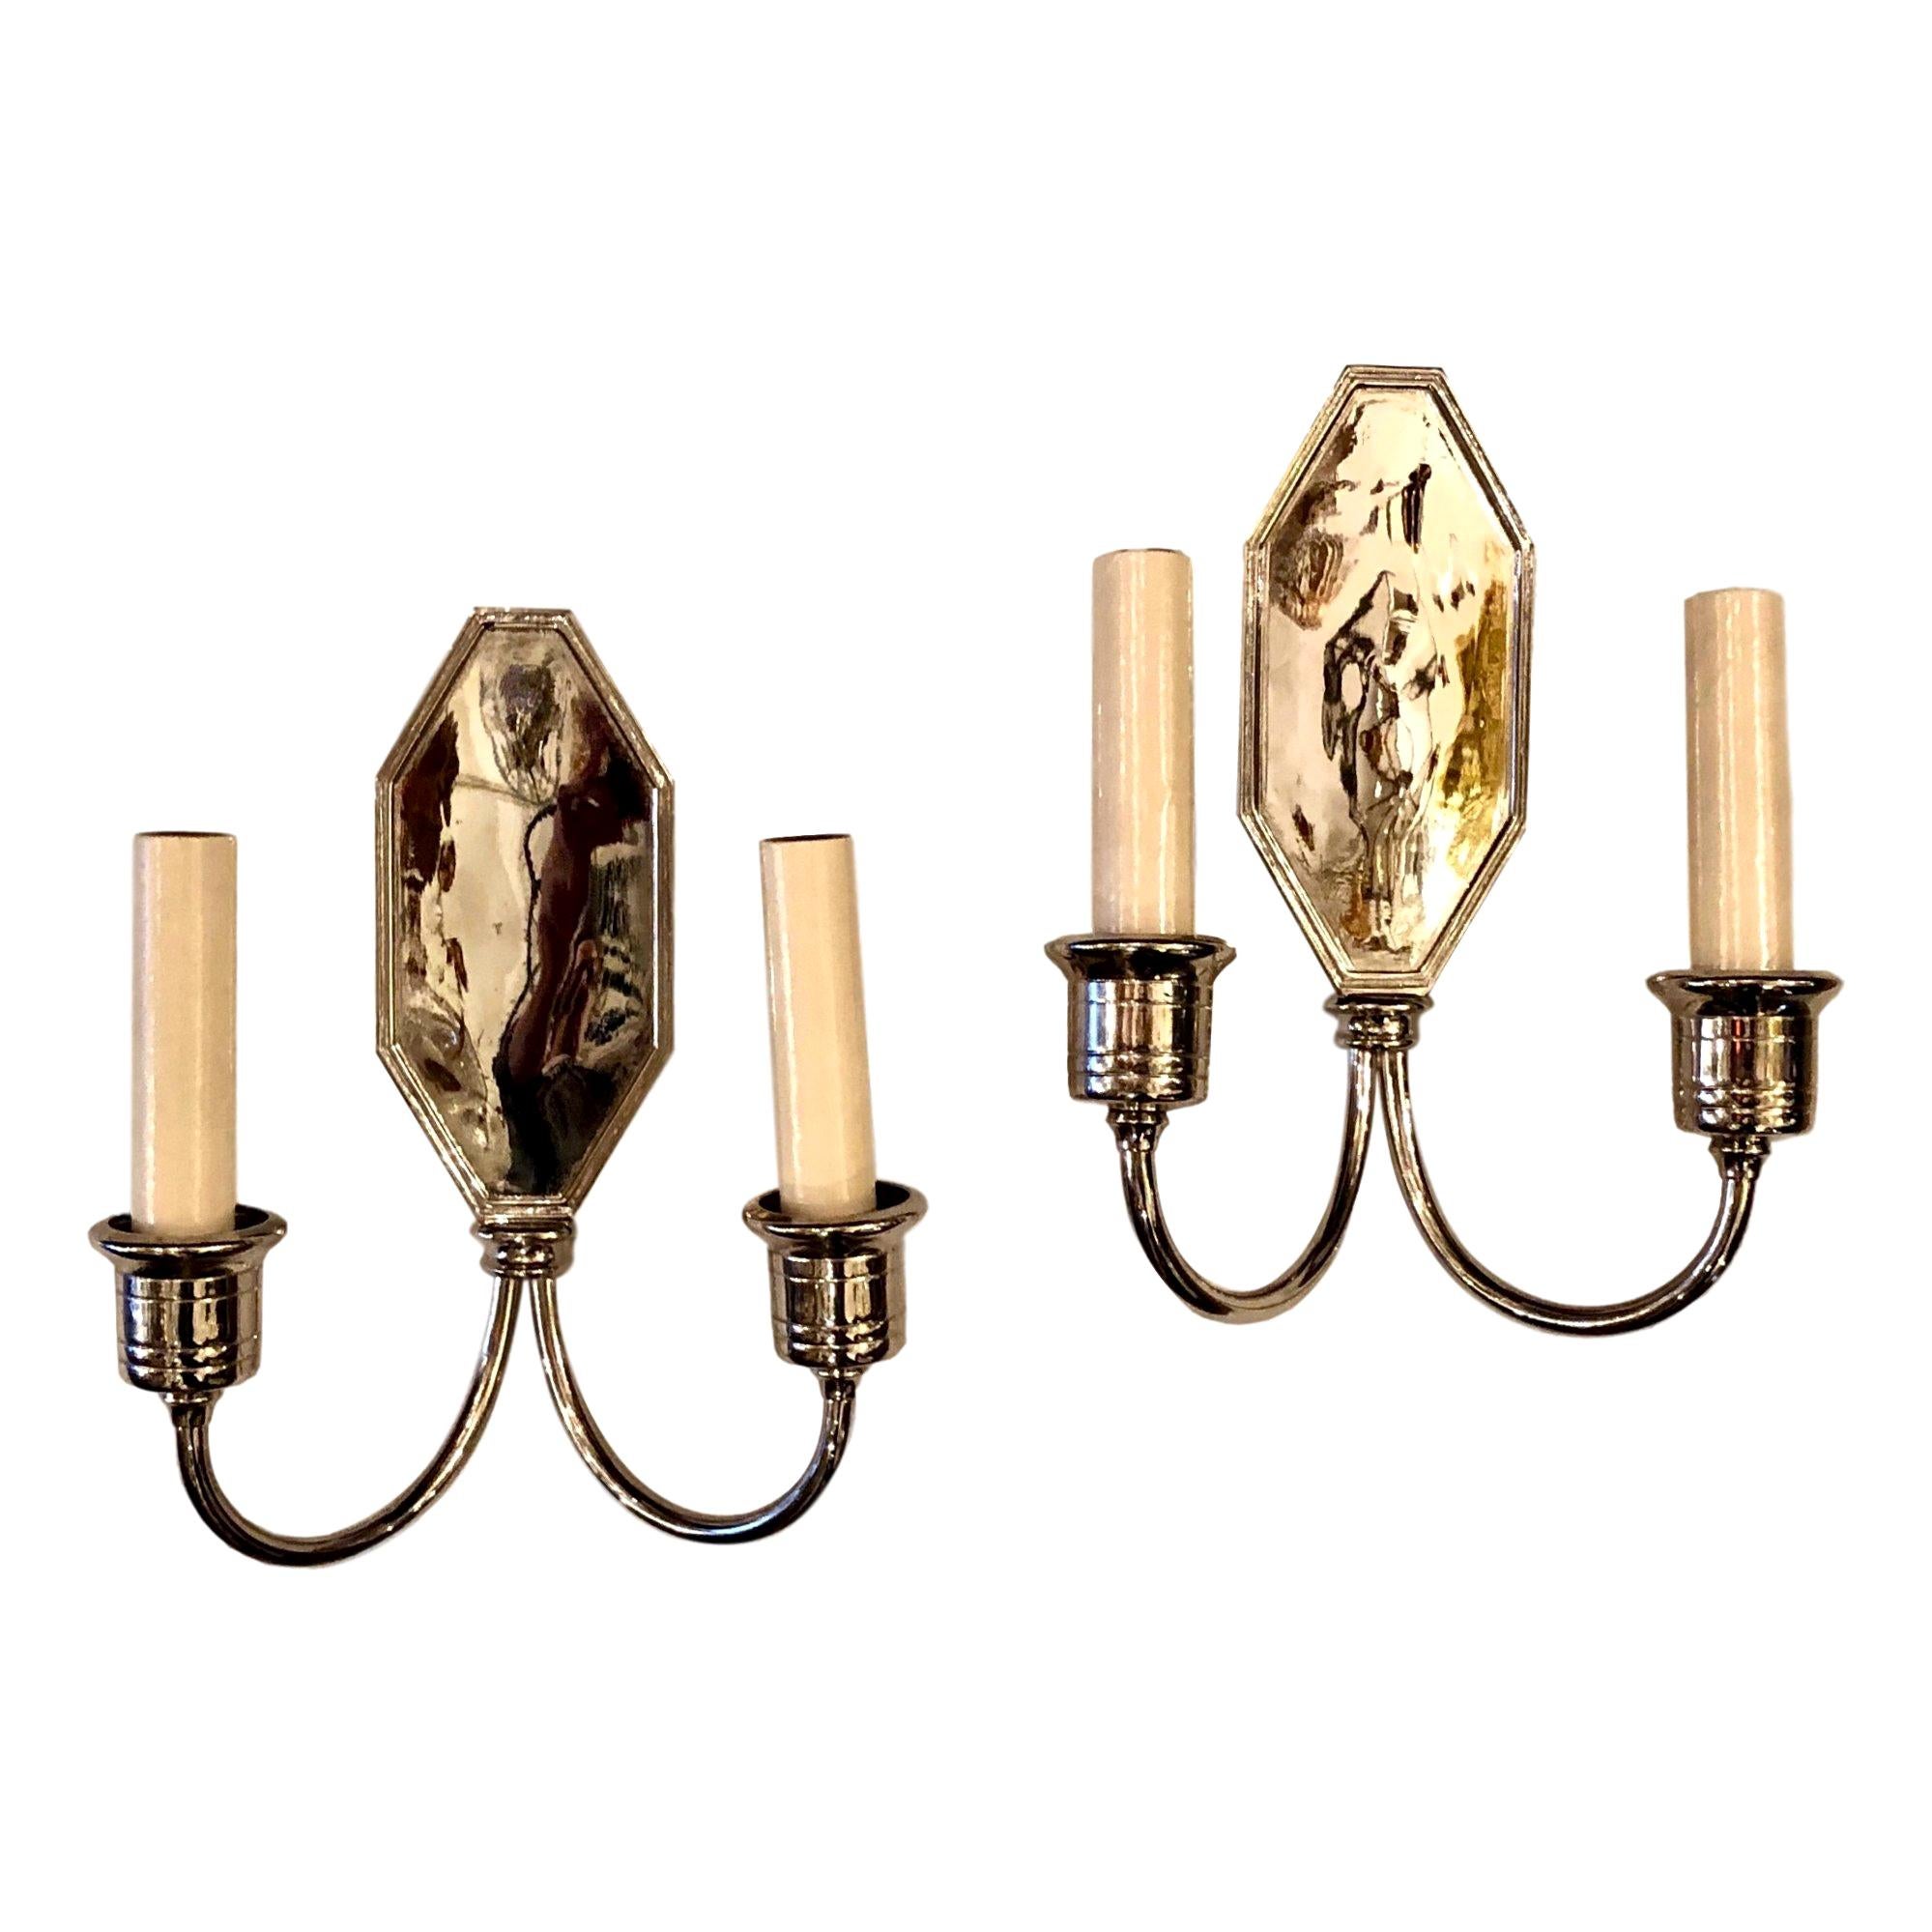 Pair of Nickel-Plated Sconces For Sale